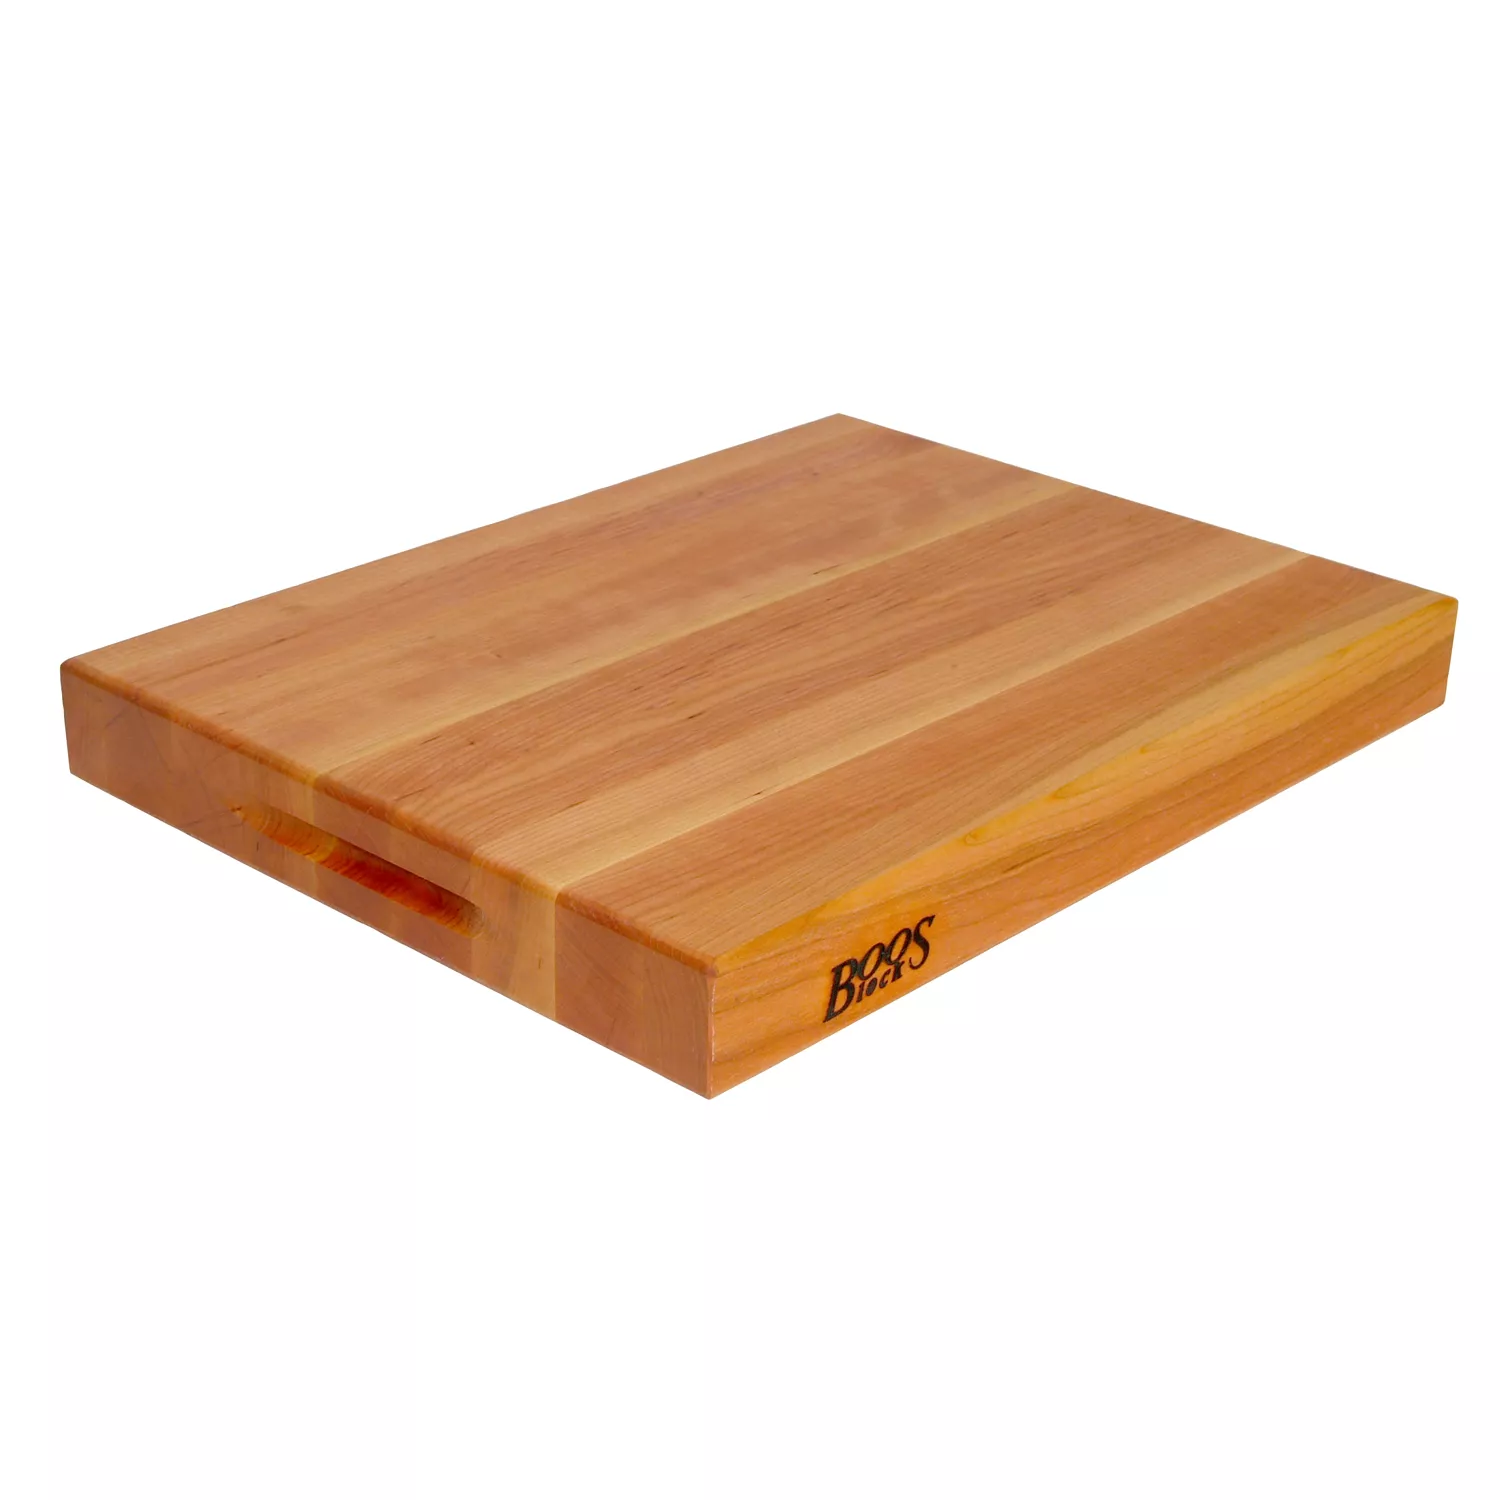 Zwilling Cherry Wood Carving Board With Handles